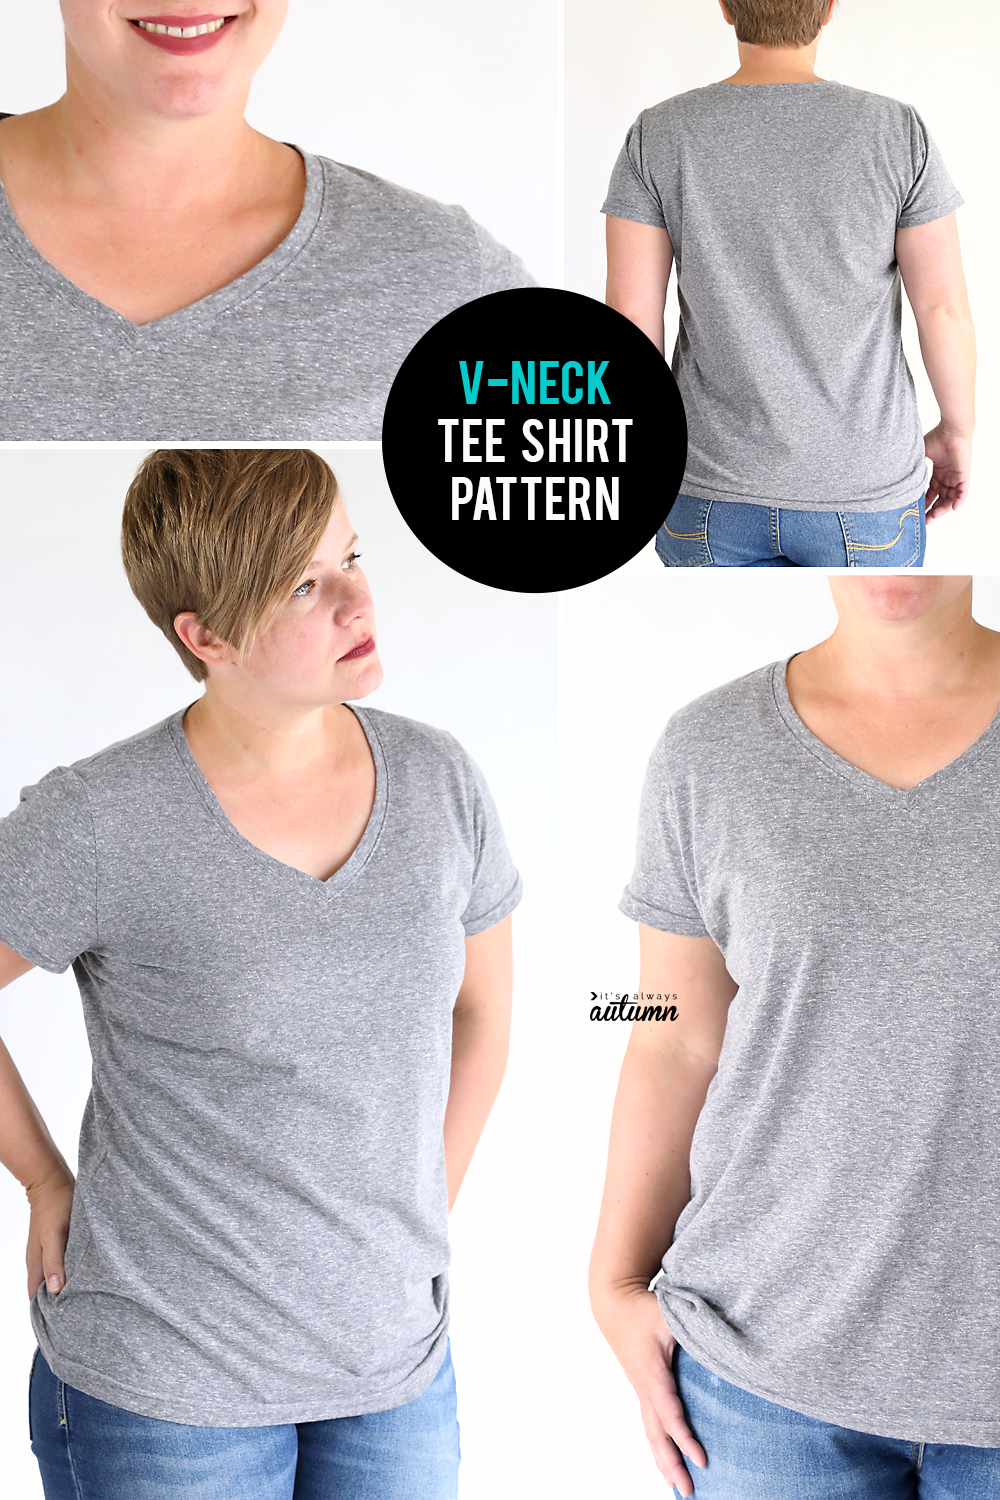 How to make a v-neck t-shirt {sewing pattern and tutorial} - It's